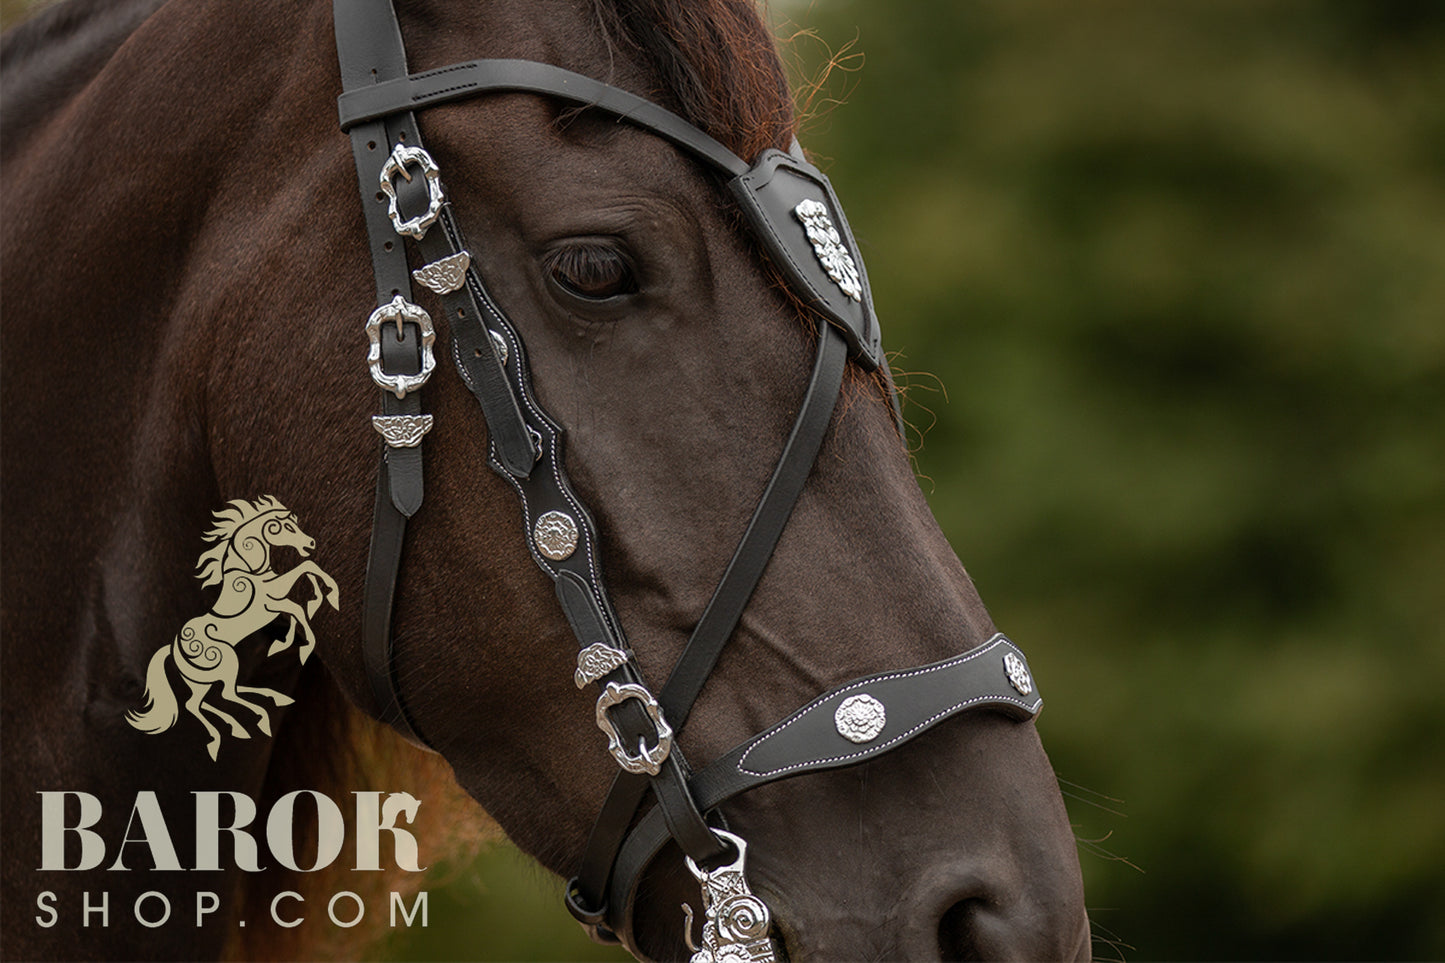 X-Browband "Ygritte"